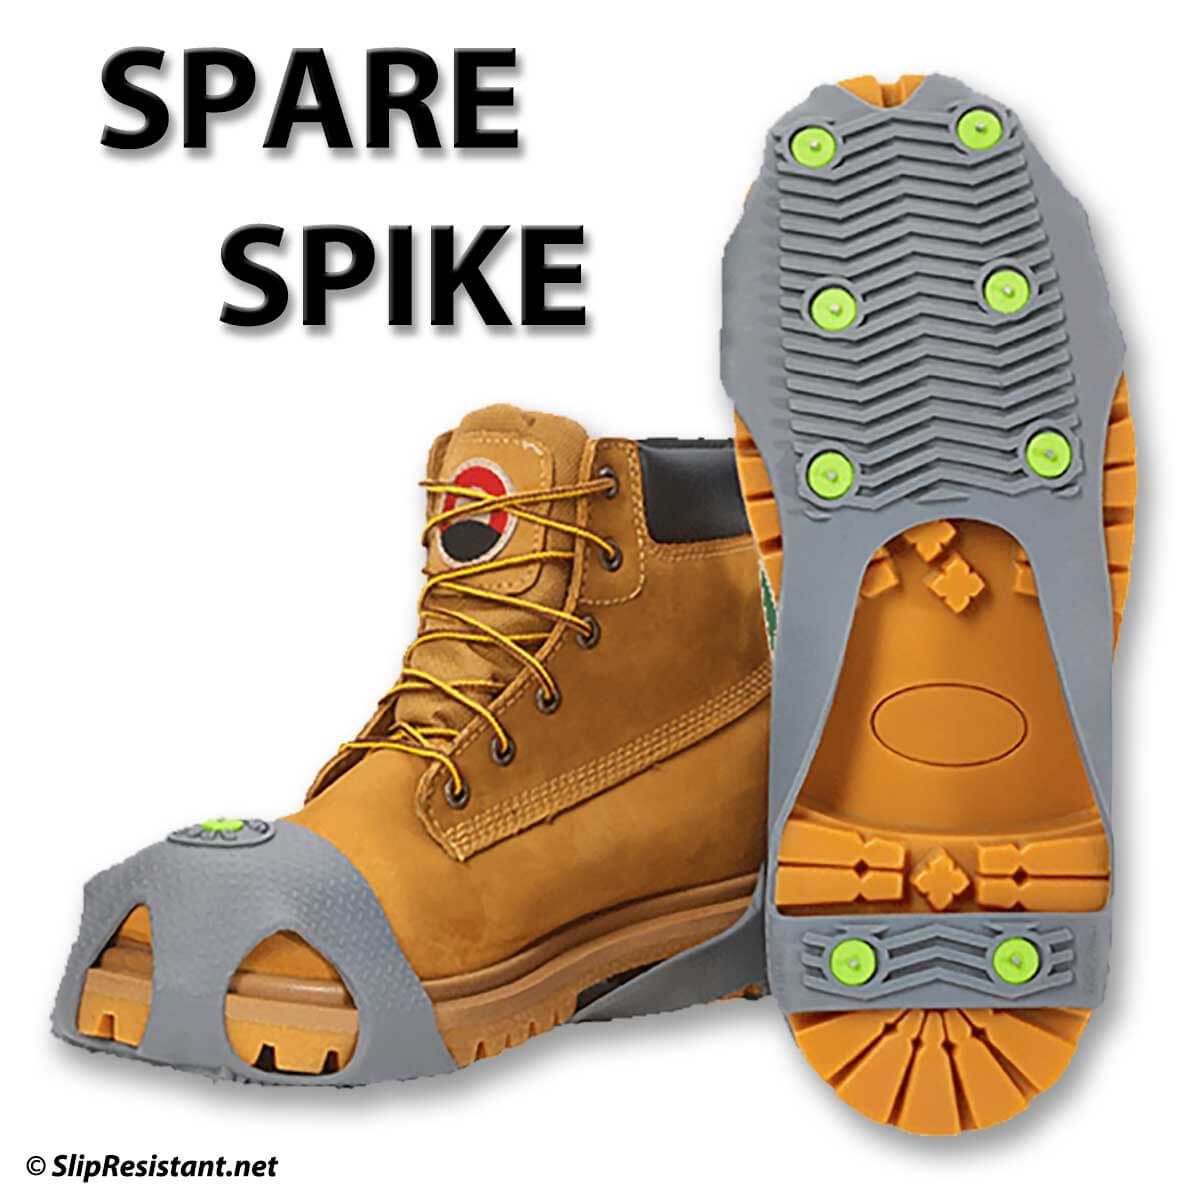 Winter Walking SPARE SPIKE Ice Cleats for Shoes and Boots